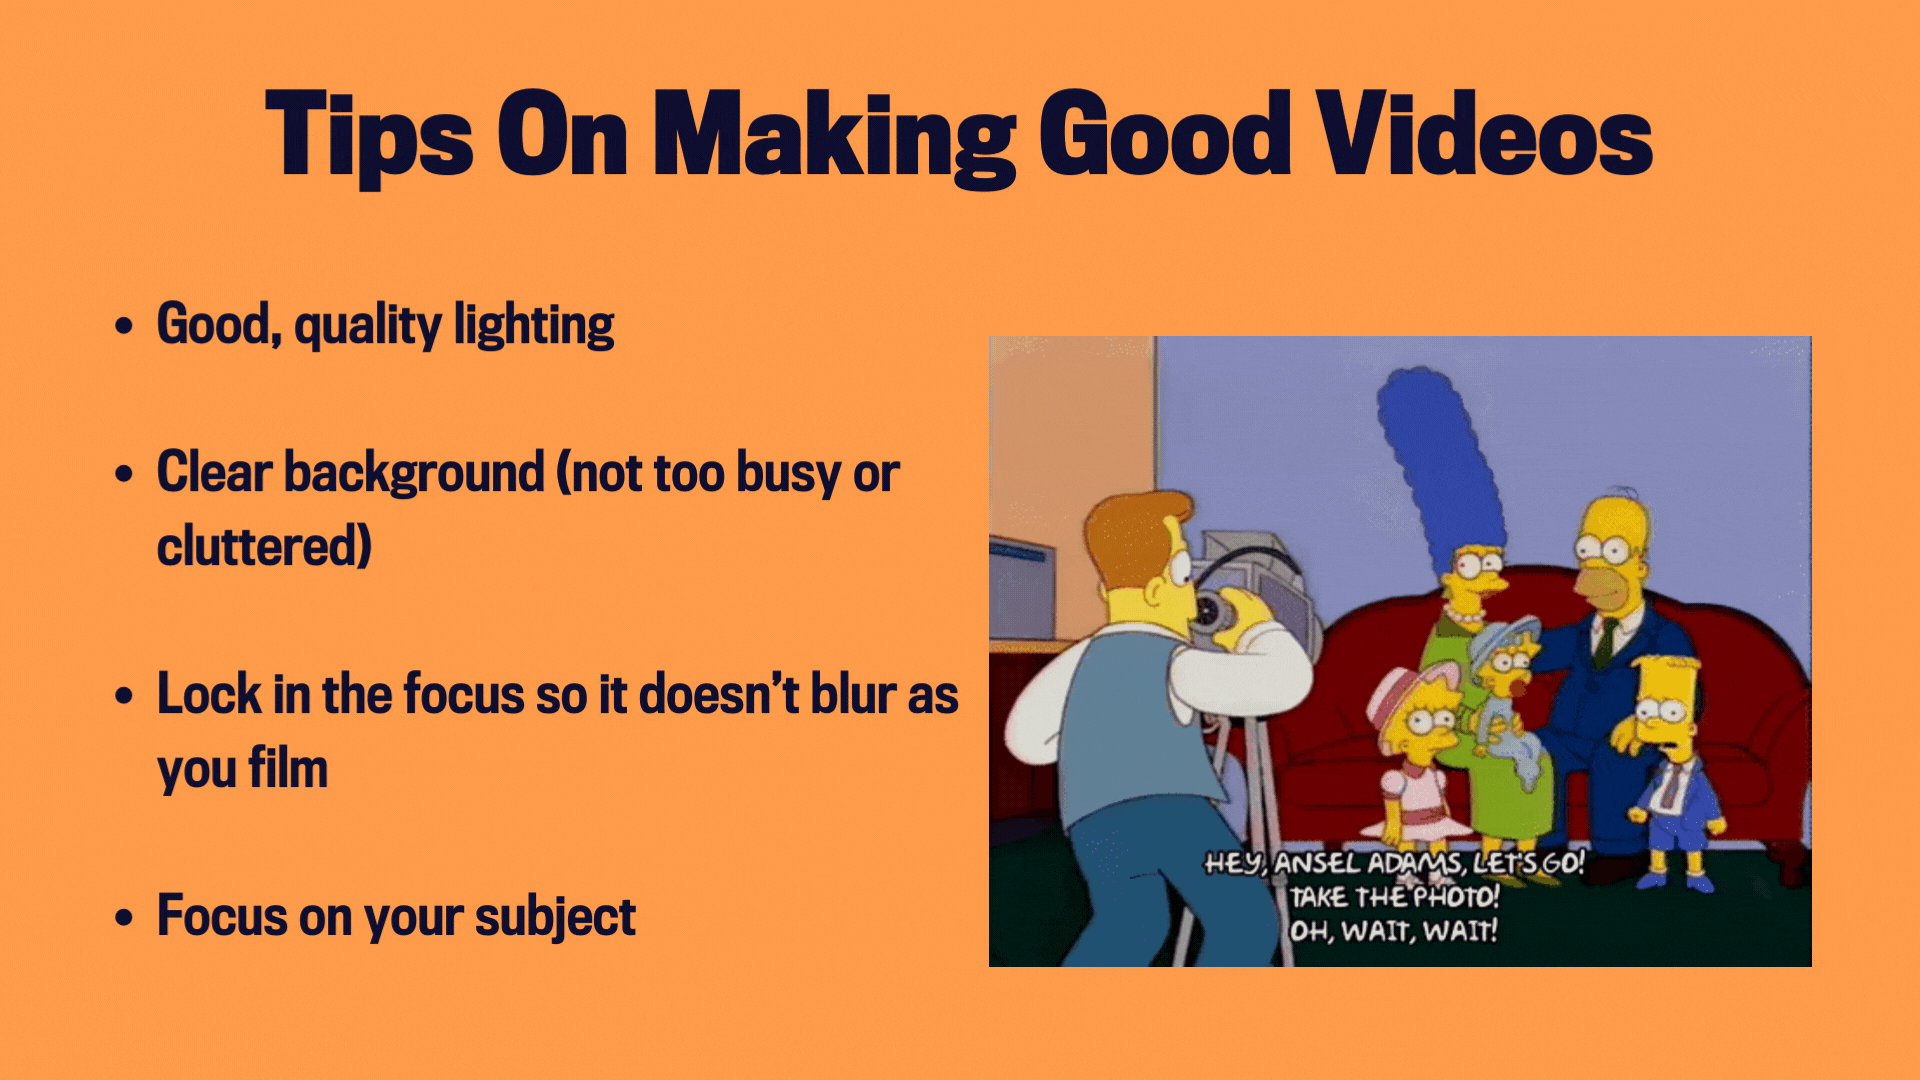 Good videos require good lighting, a clear background, and focus on the subject